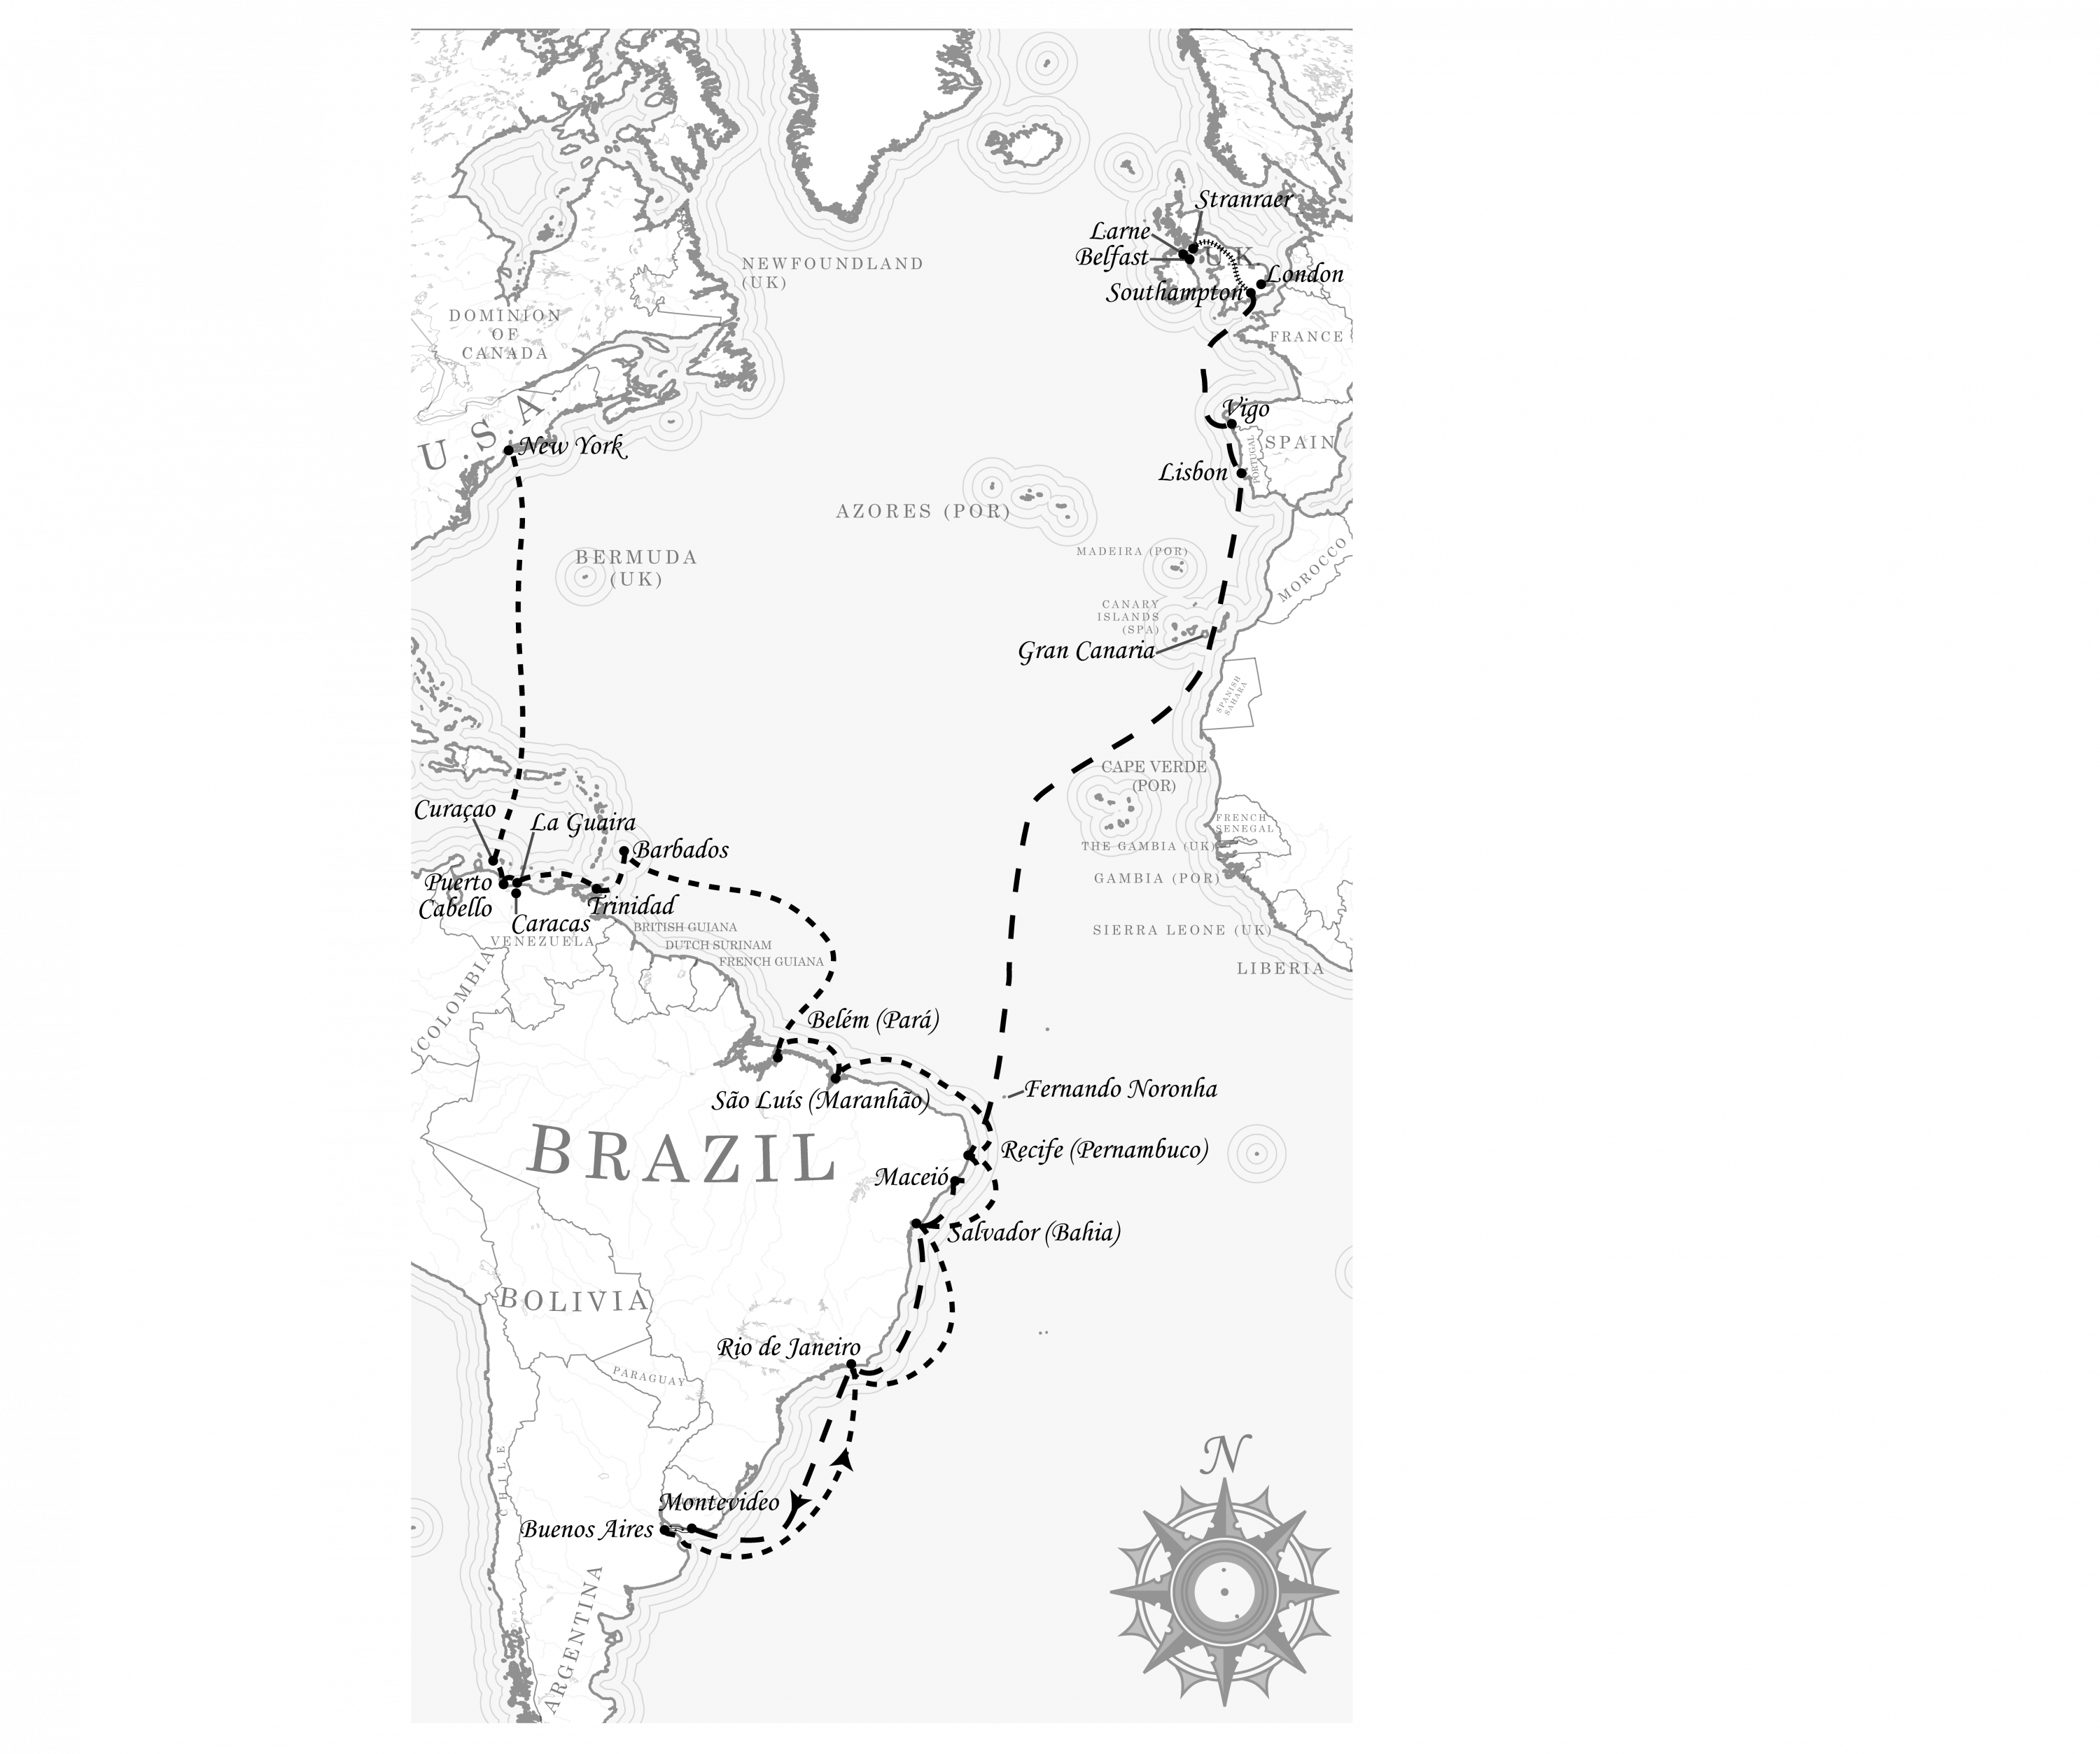 Map of the 1893-1894 voyage by John McCaldin Loewenthal showing his travels from the UK to South America and then to New York